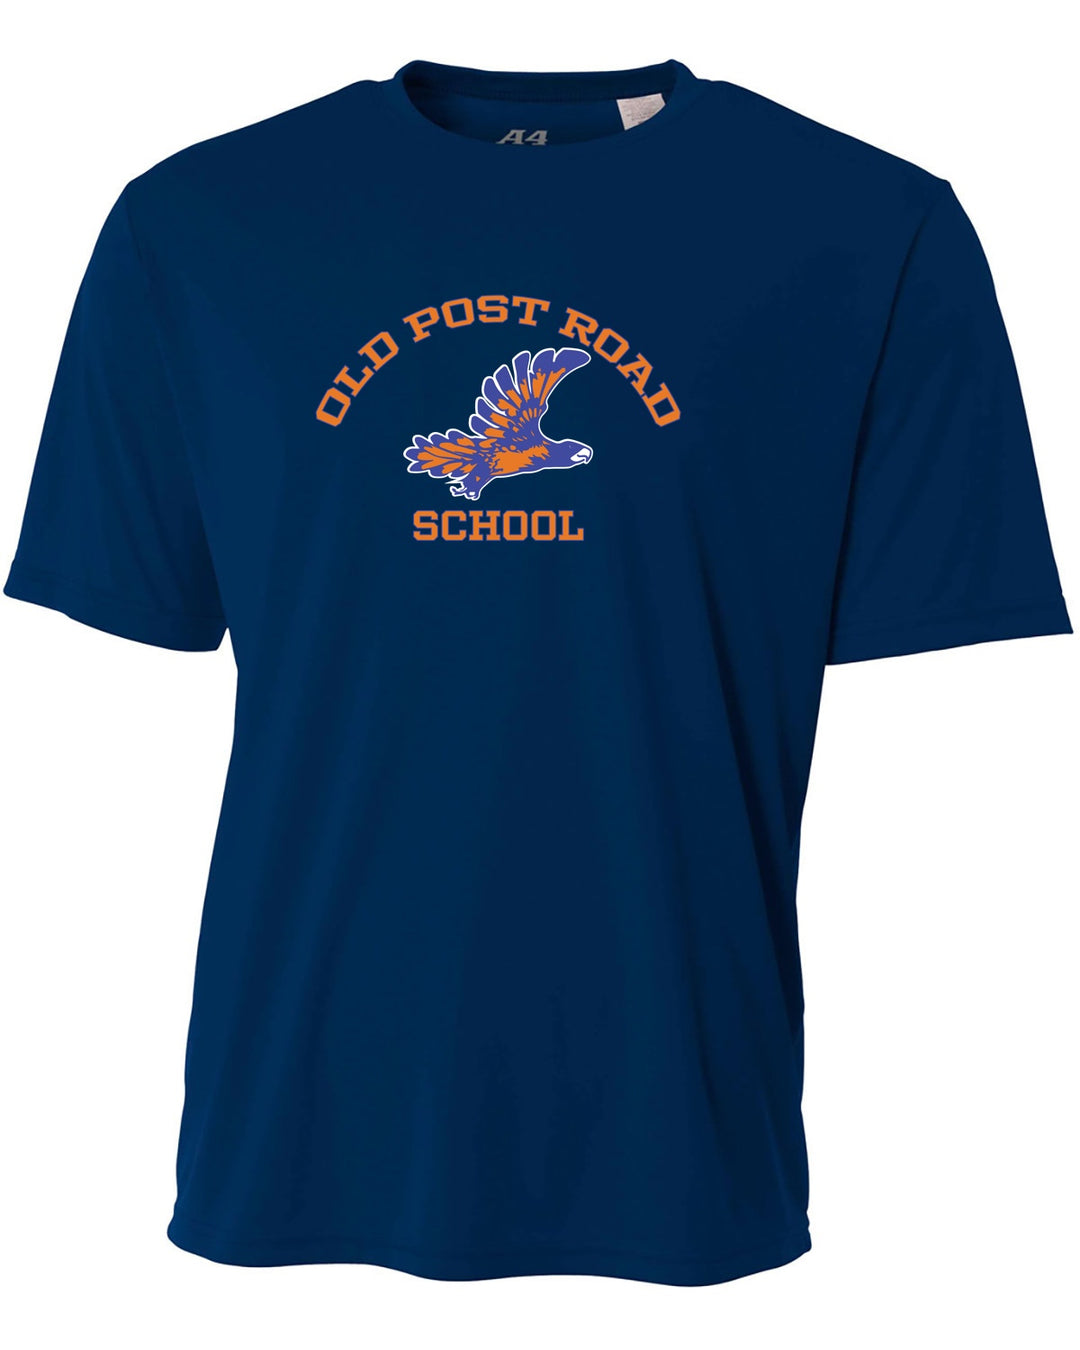 Old Post Road School - A4 Youth Cooling Performance T-Shirt (NB3142)